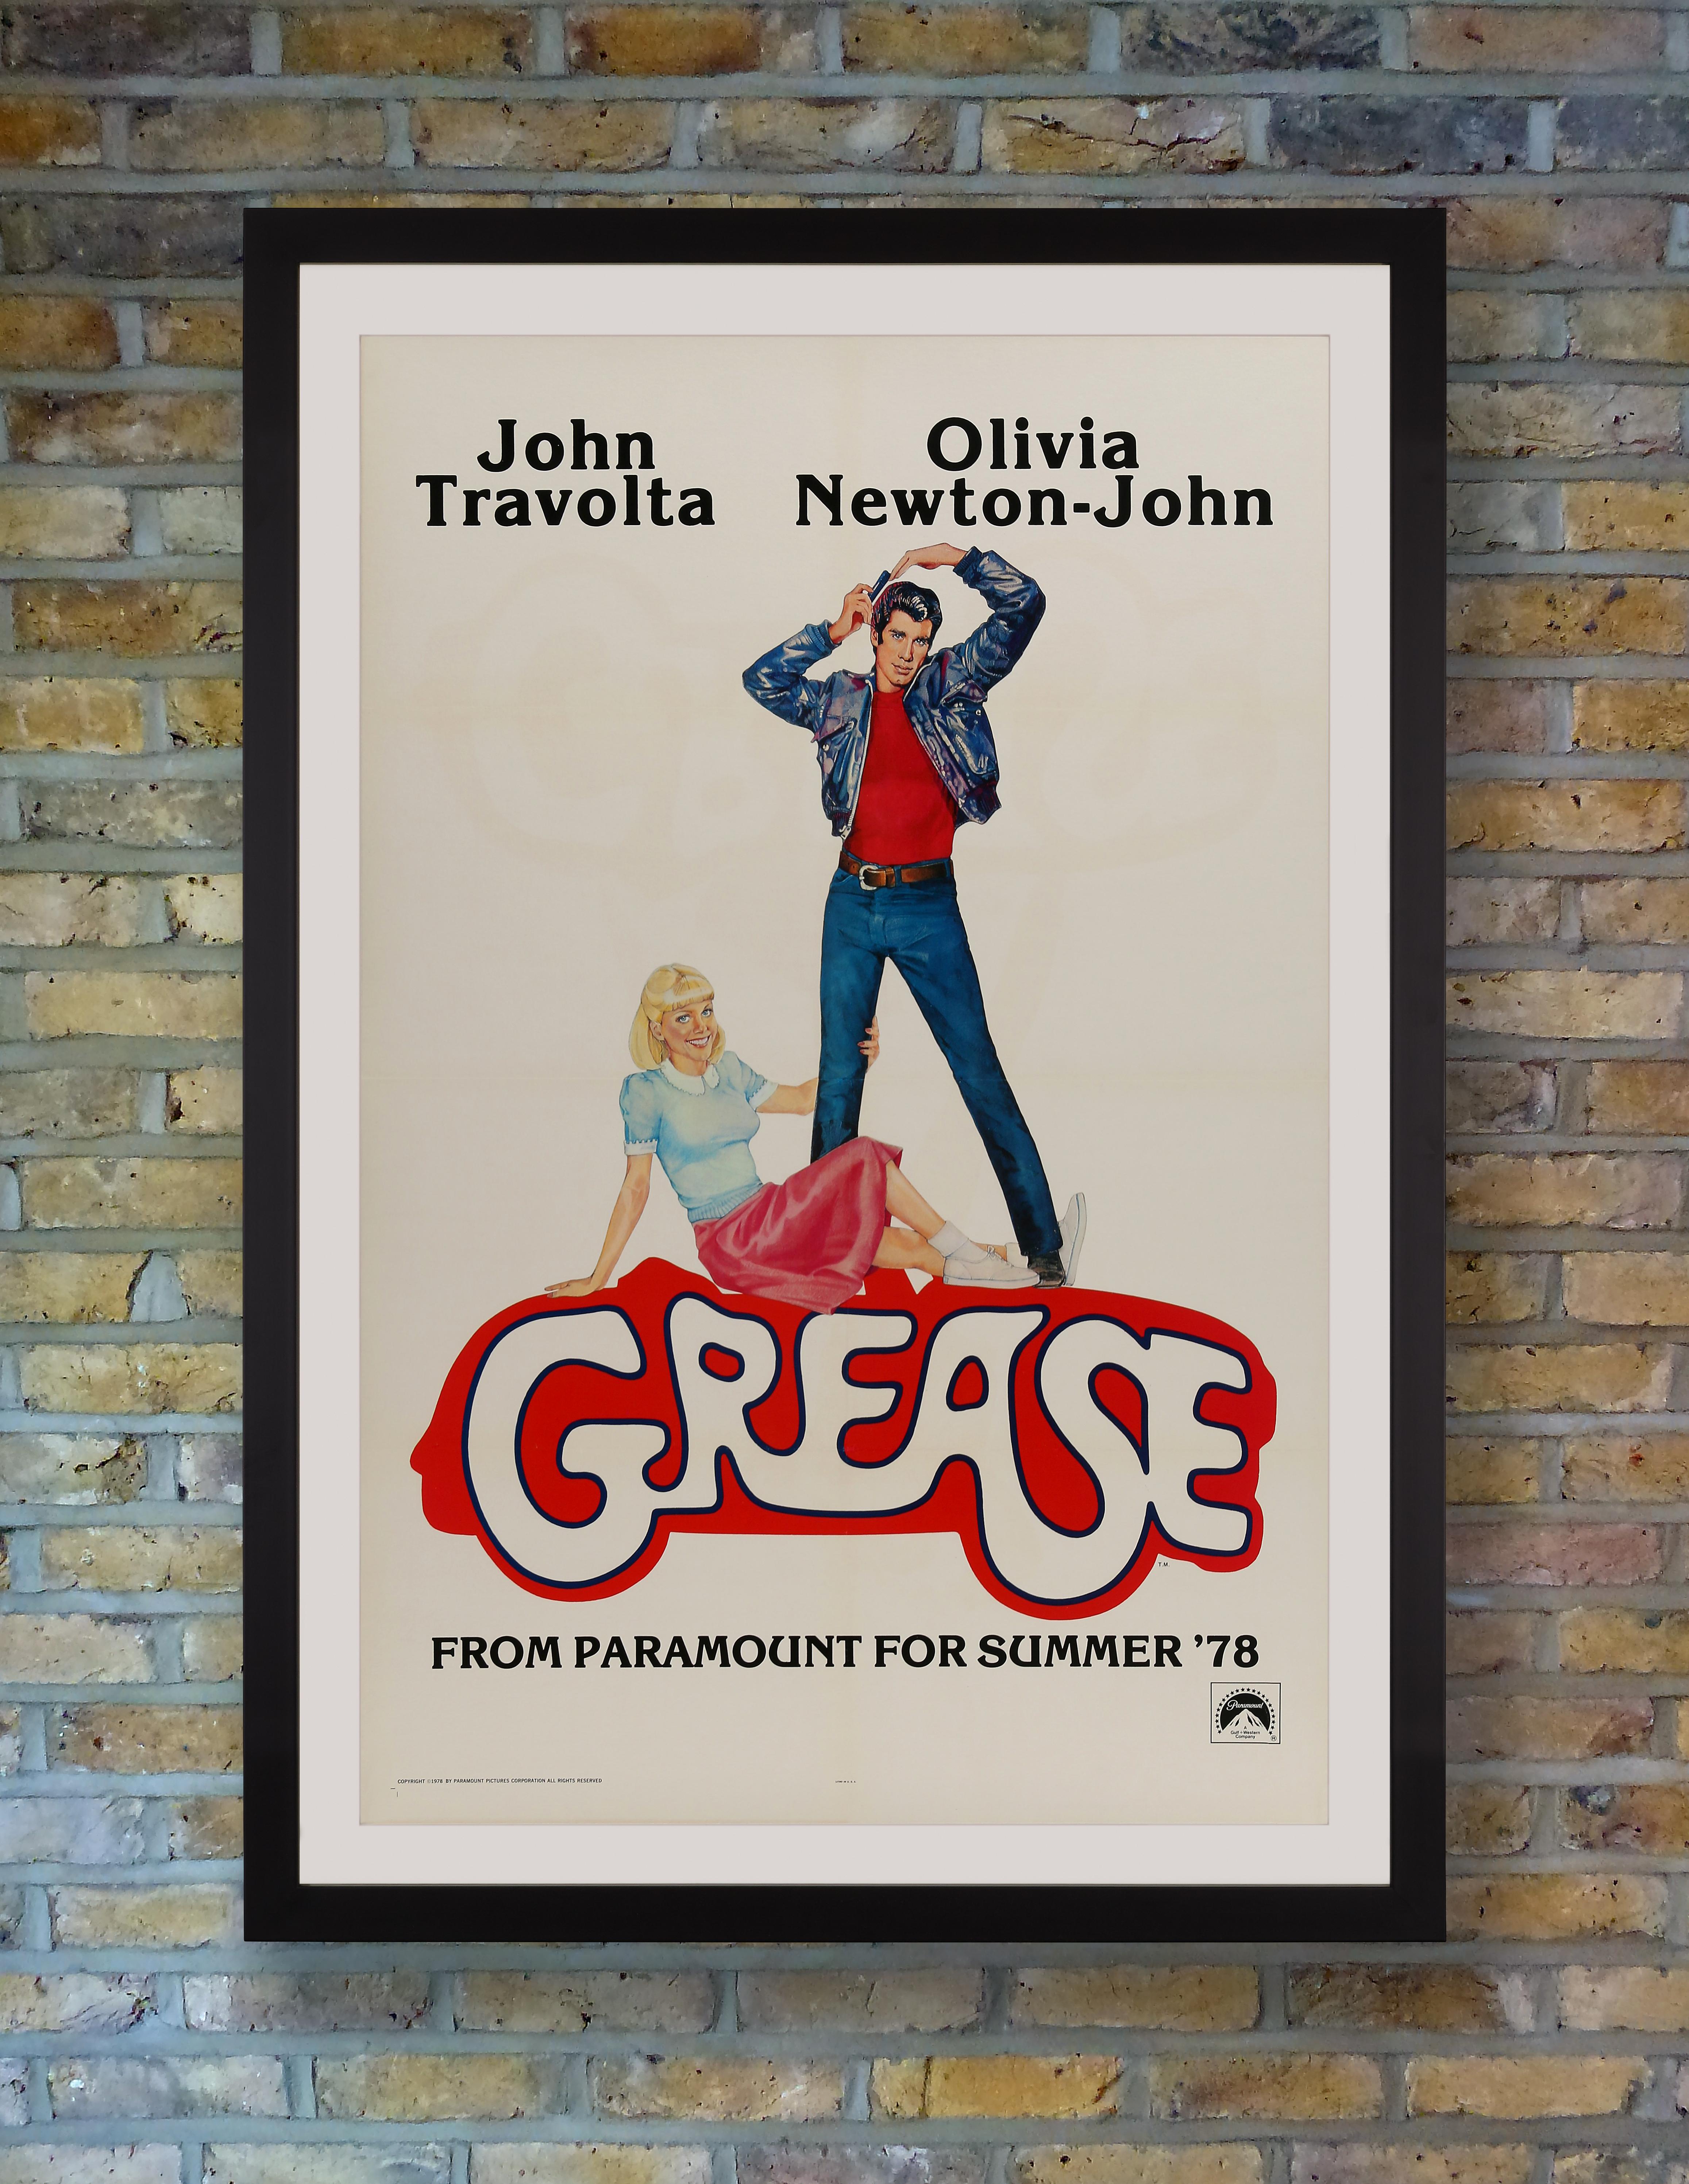 This rare US One Sheet poster with a delightfully peppy design by Linda Fennimore was released for the teaser campaign ahead of the summer 1978 release of Paramount's blockbuster musical romance 'Grease.' Based on the Broadway musical of the same